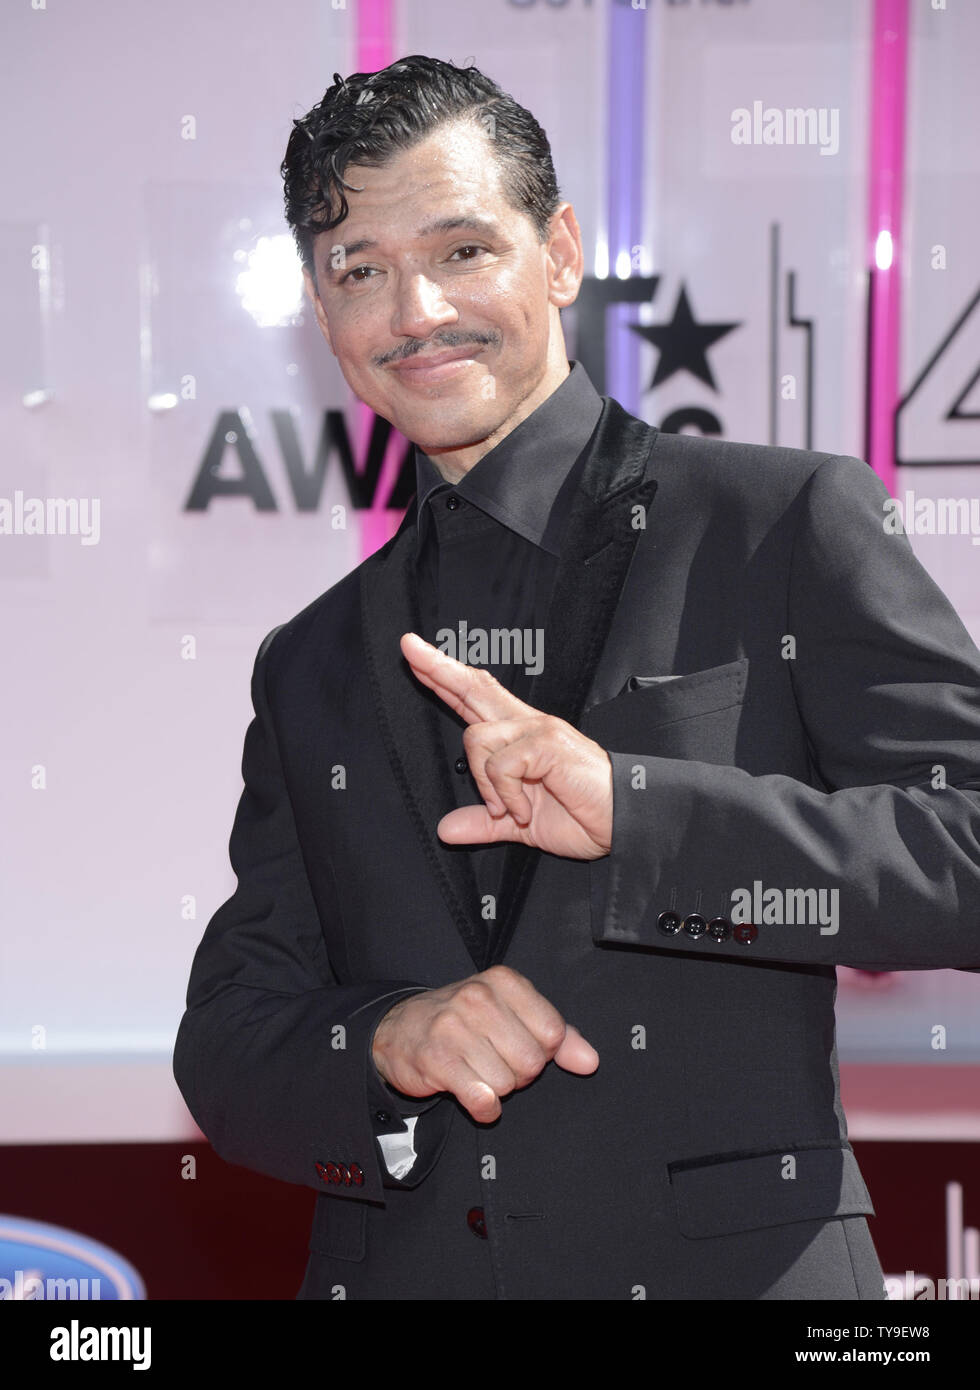 Musician El DeBarge attends the 14th annual BET Awards at Nokia Theatre L.A. Live in Los Angeles on June 29, 2014. The award show spotlights the 50th anniversary of the Civil Rights Bill and its impact on America. UPI/Phil McCarten Stock Photo